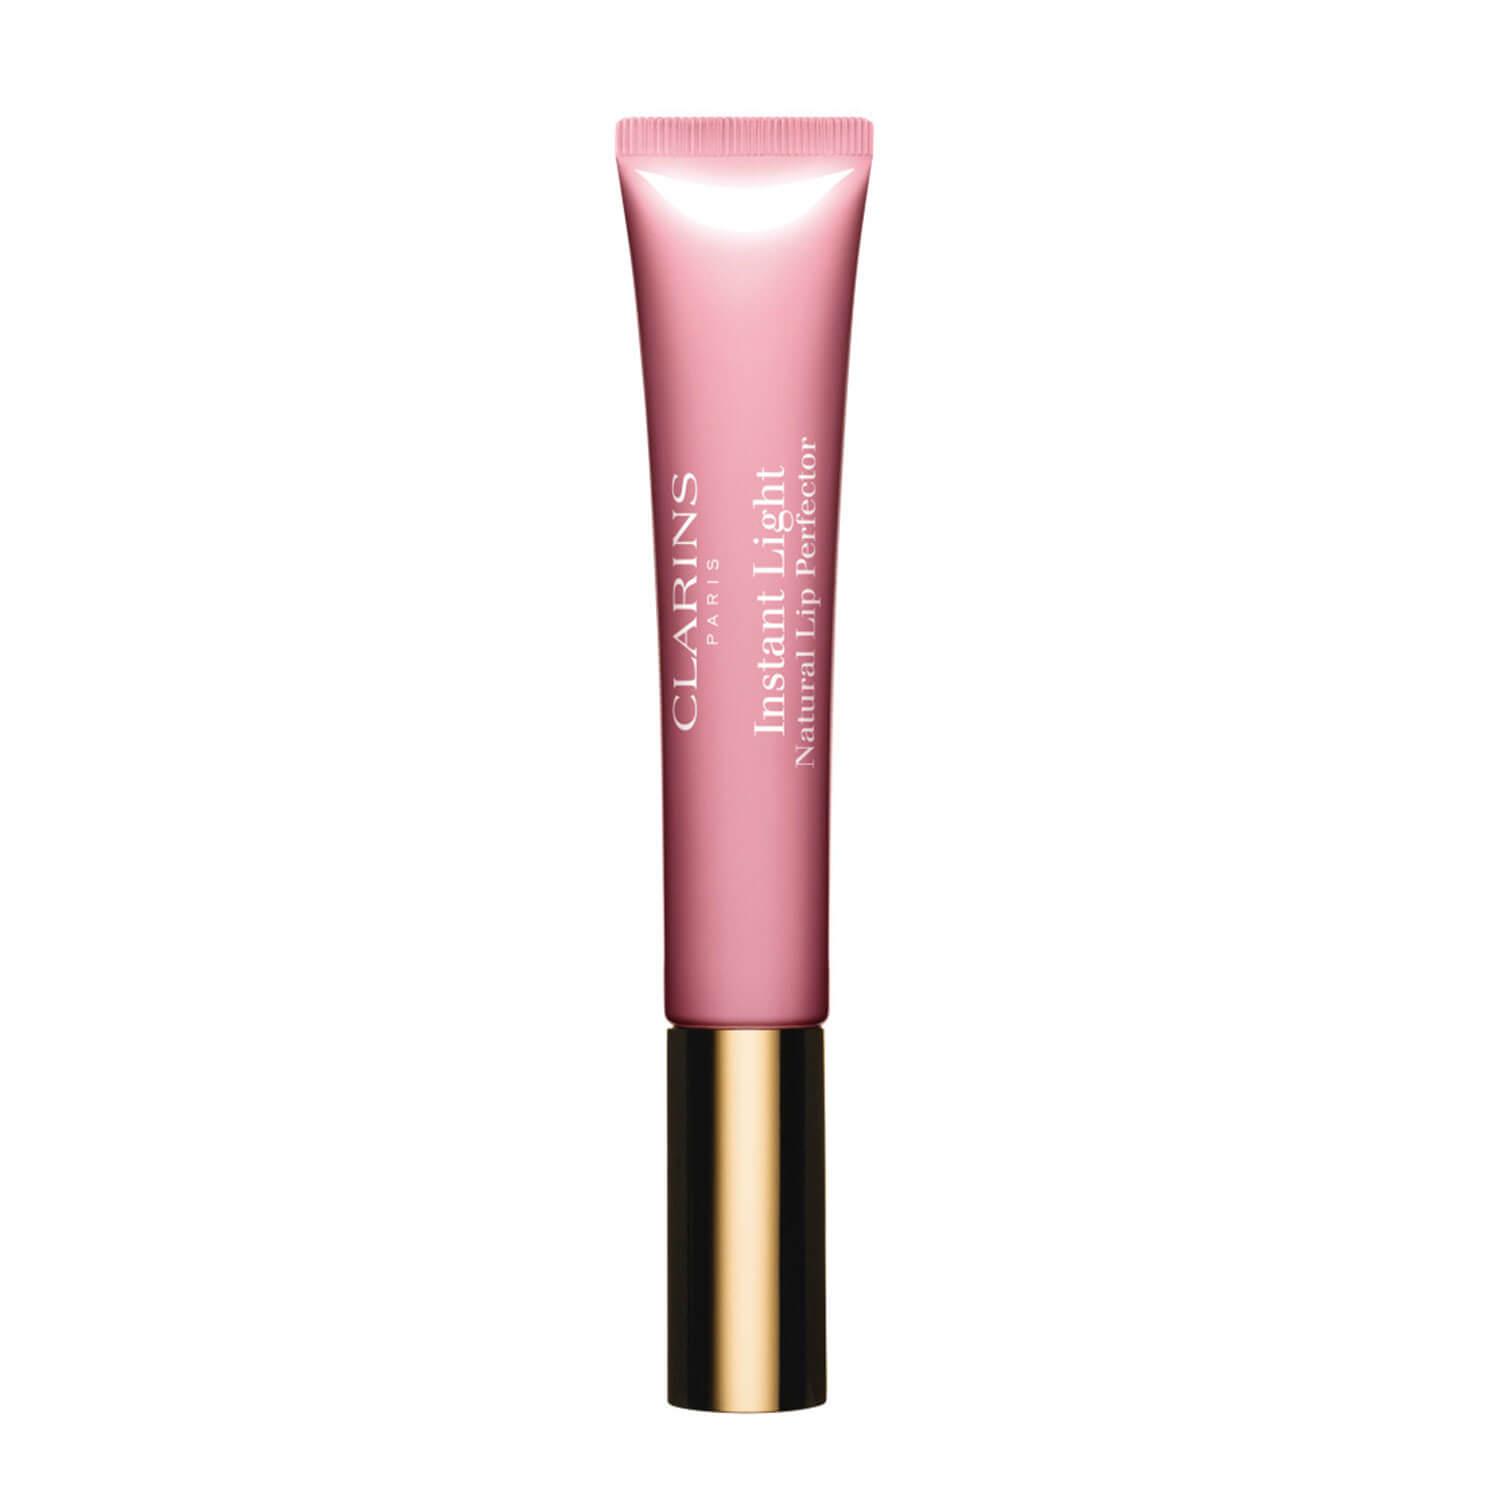 Lip Perfector - Apricot Shimmer 02